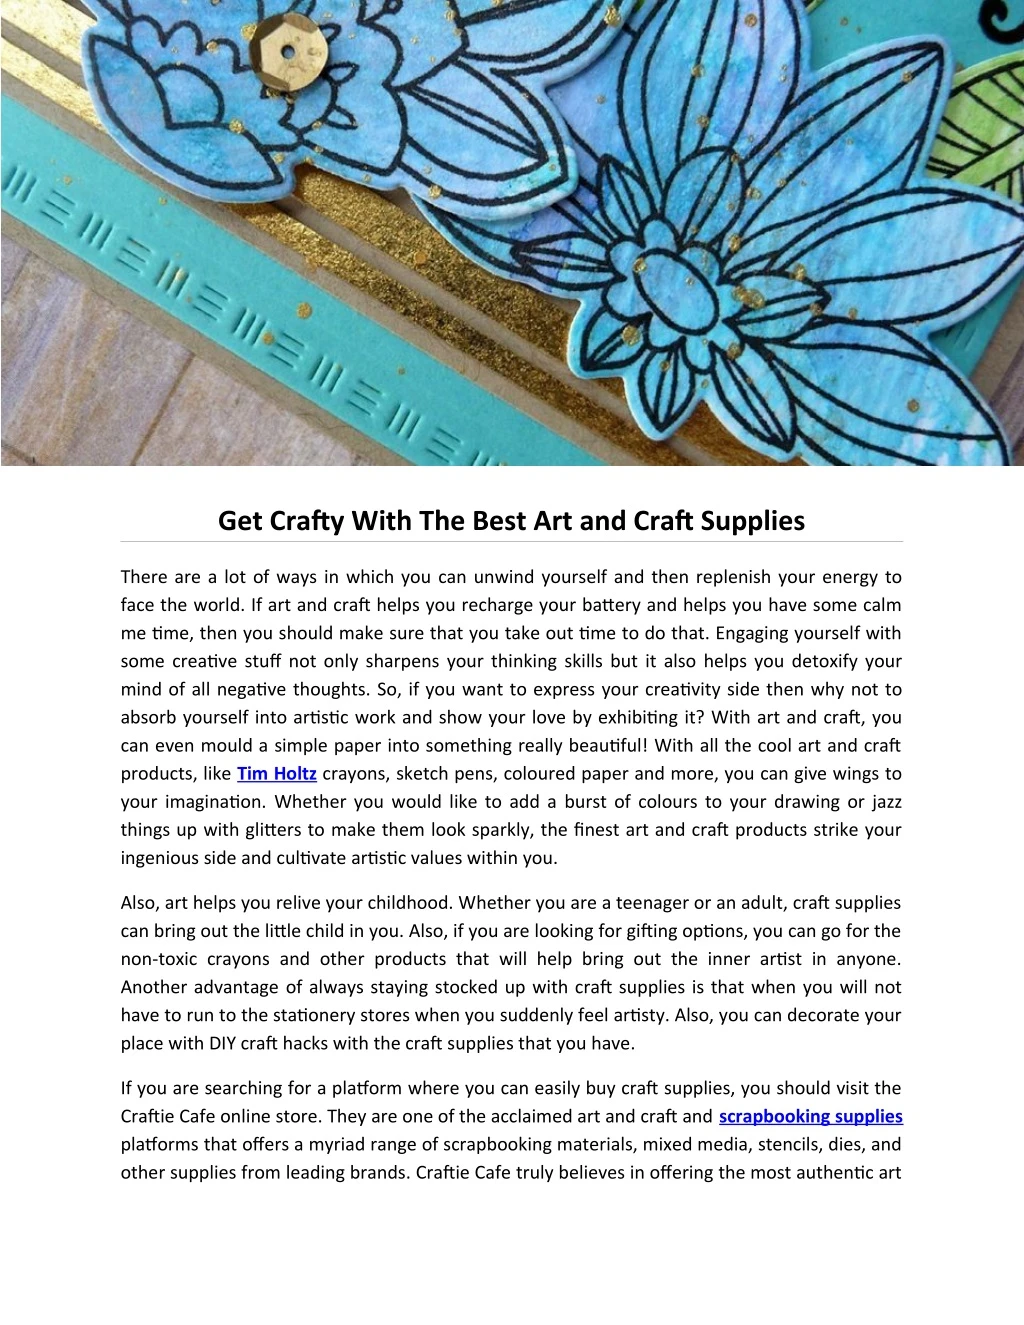 get crafty with the best art and craft supplies